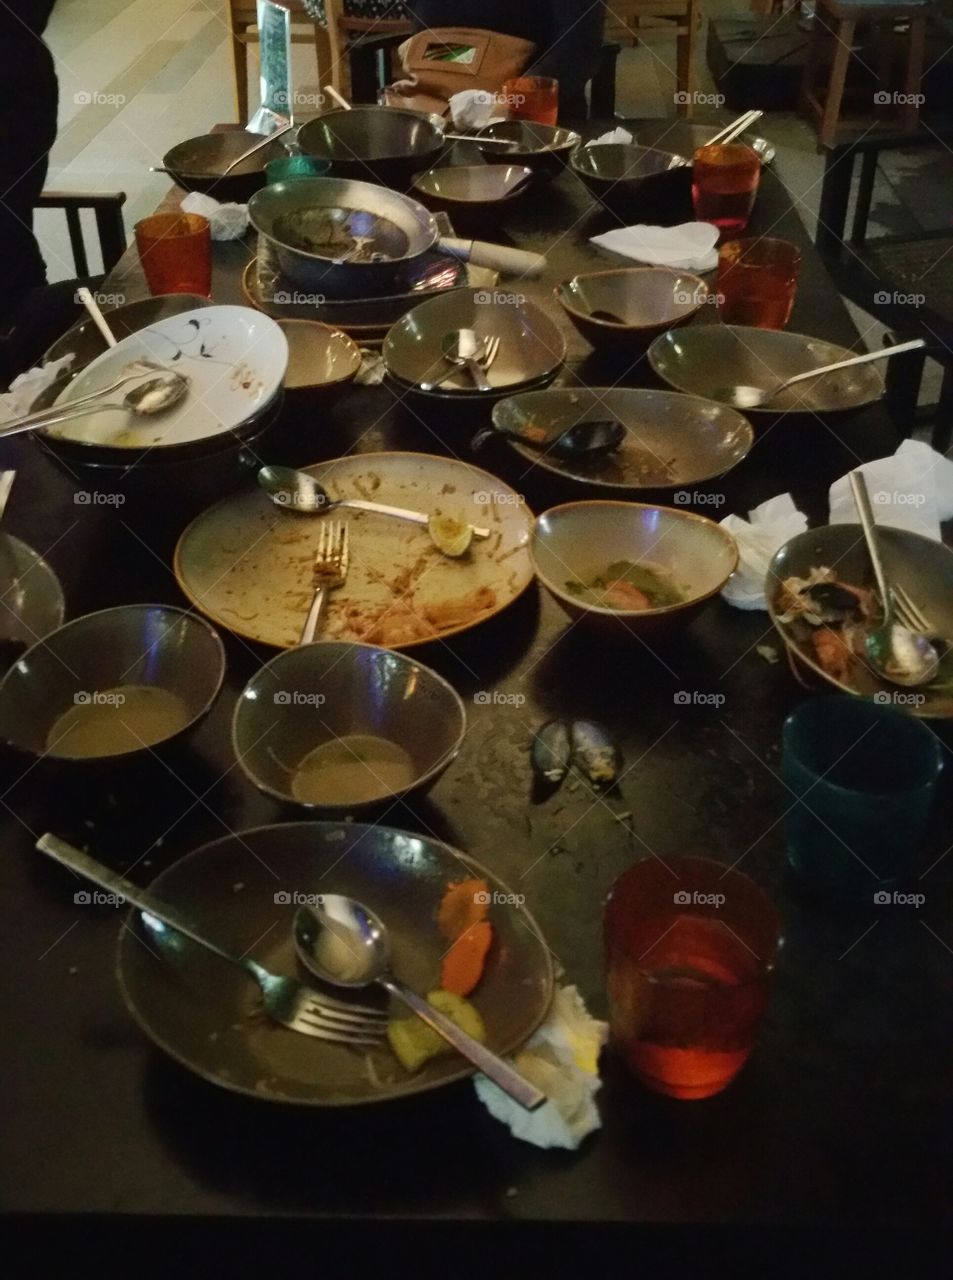 After dinner at dining table, left with empty plates and bowls.